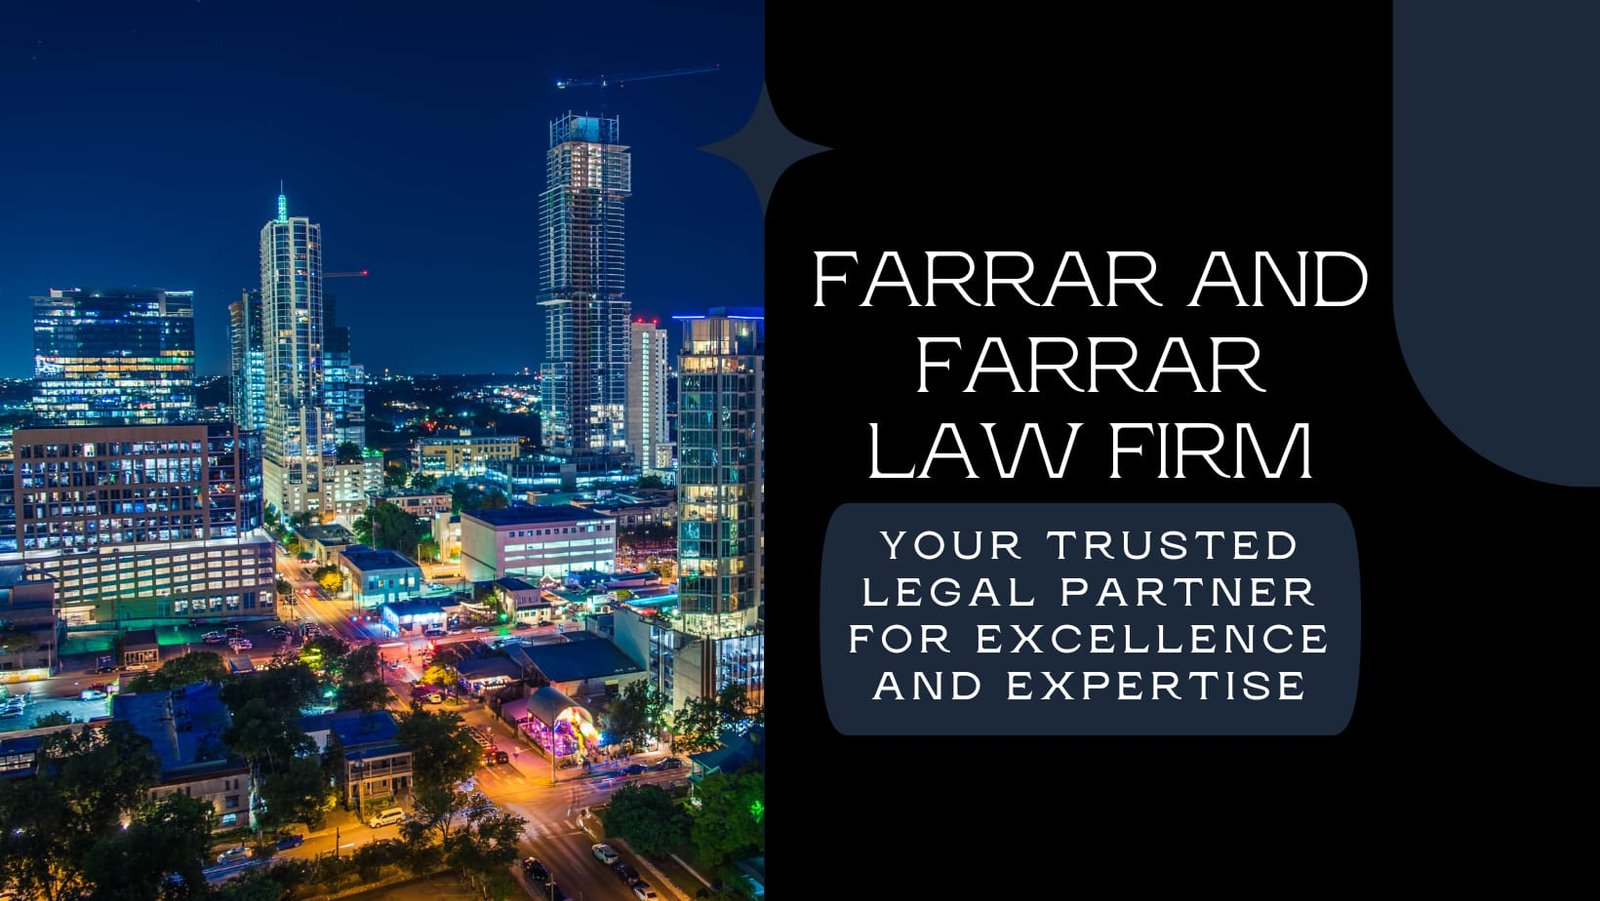 Farrar and Farrar Law Firm: Your Trusted Legal Partner for Excellence and Expertise